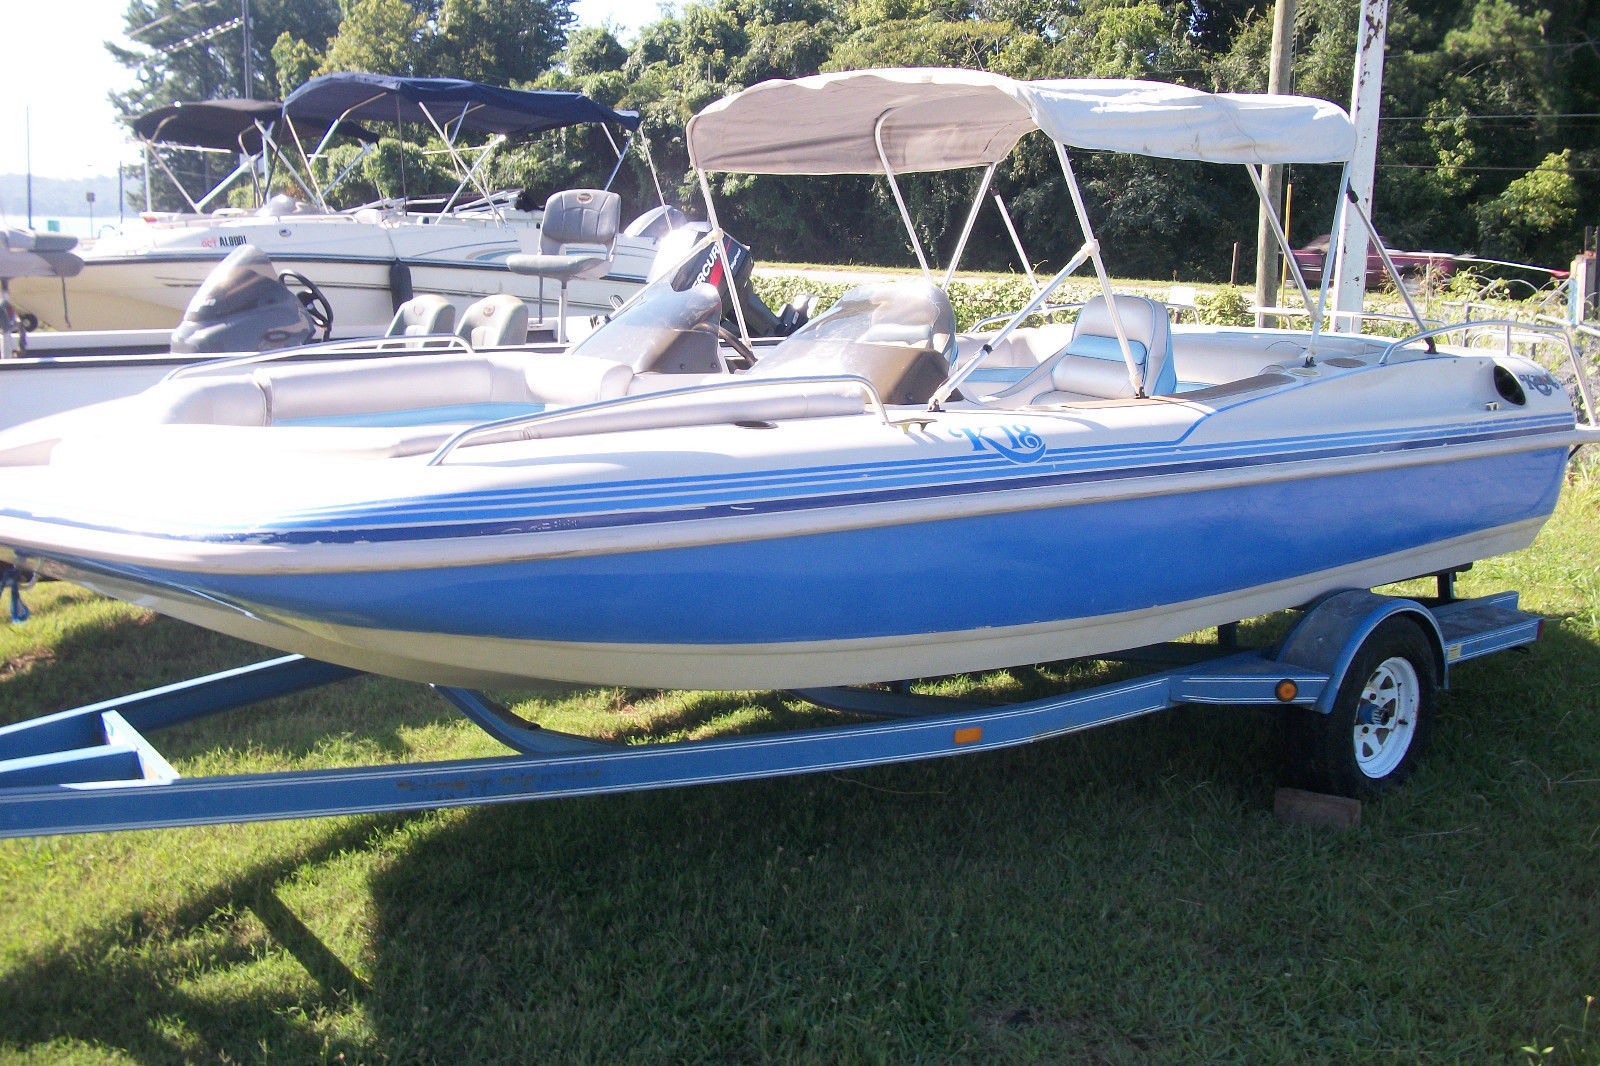 Harris Kayot 1997 for sale for $1,000 - Boats-from-USA.com